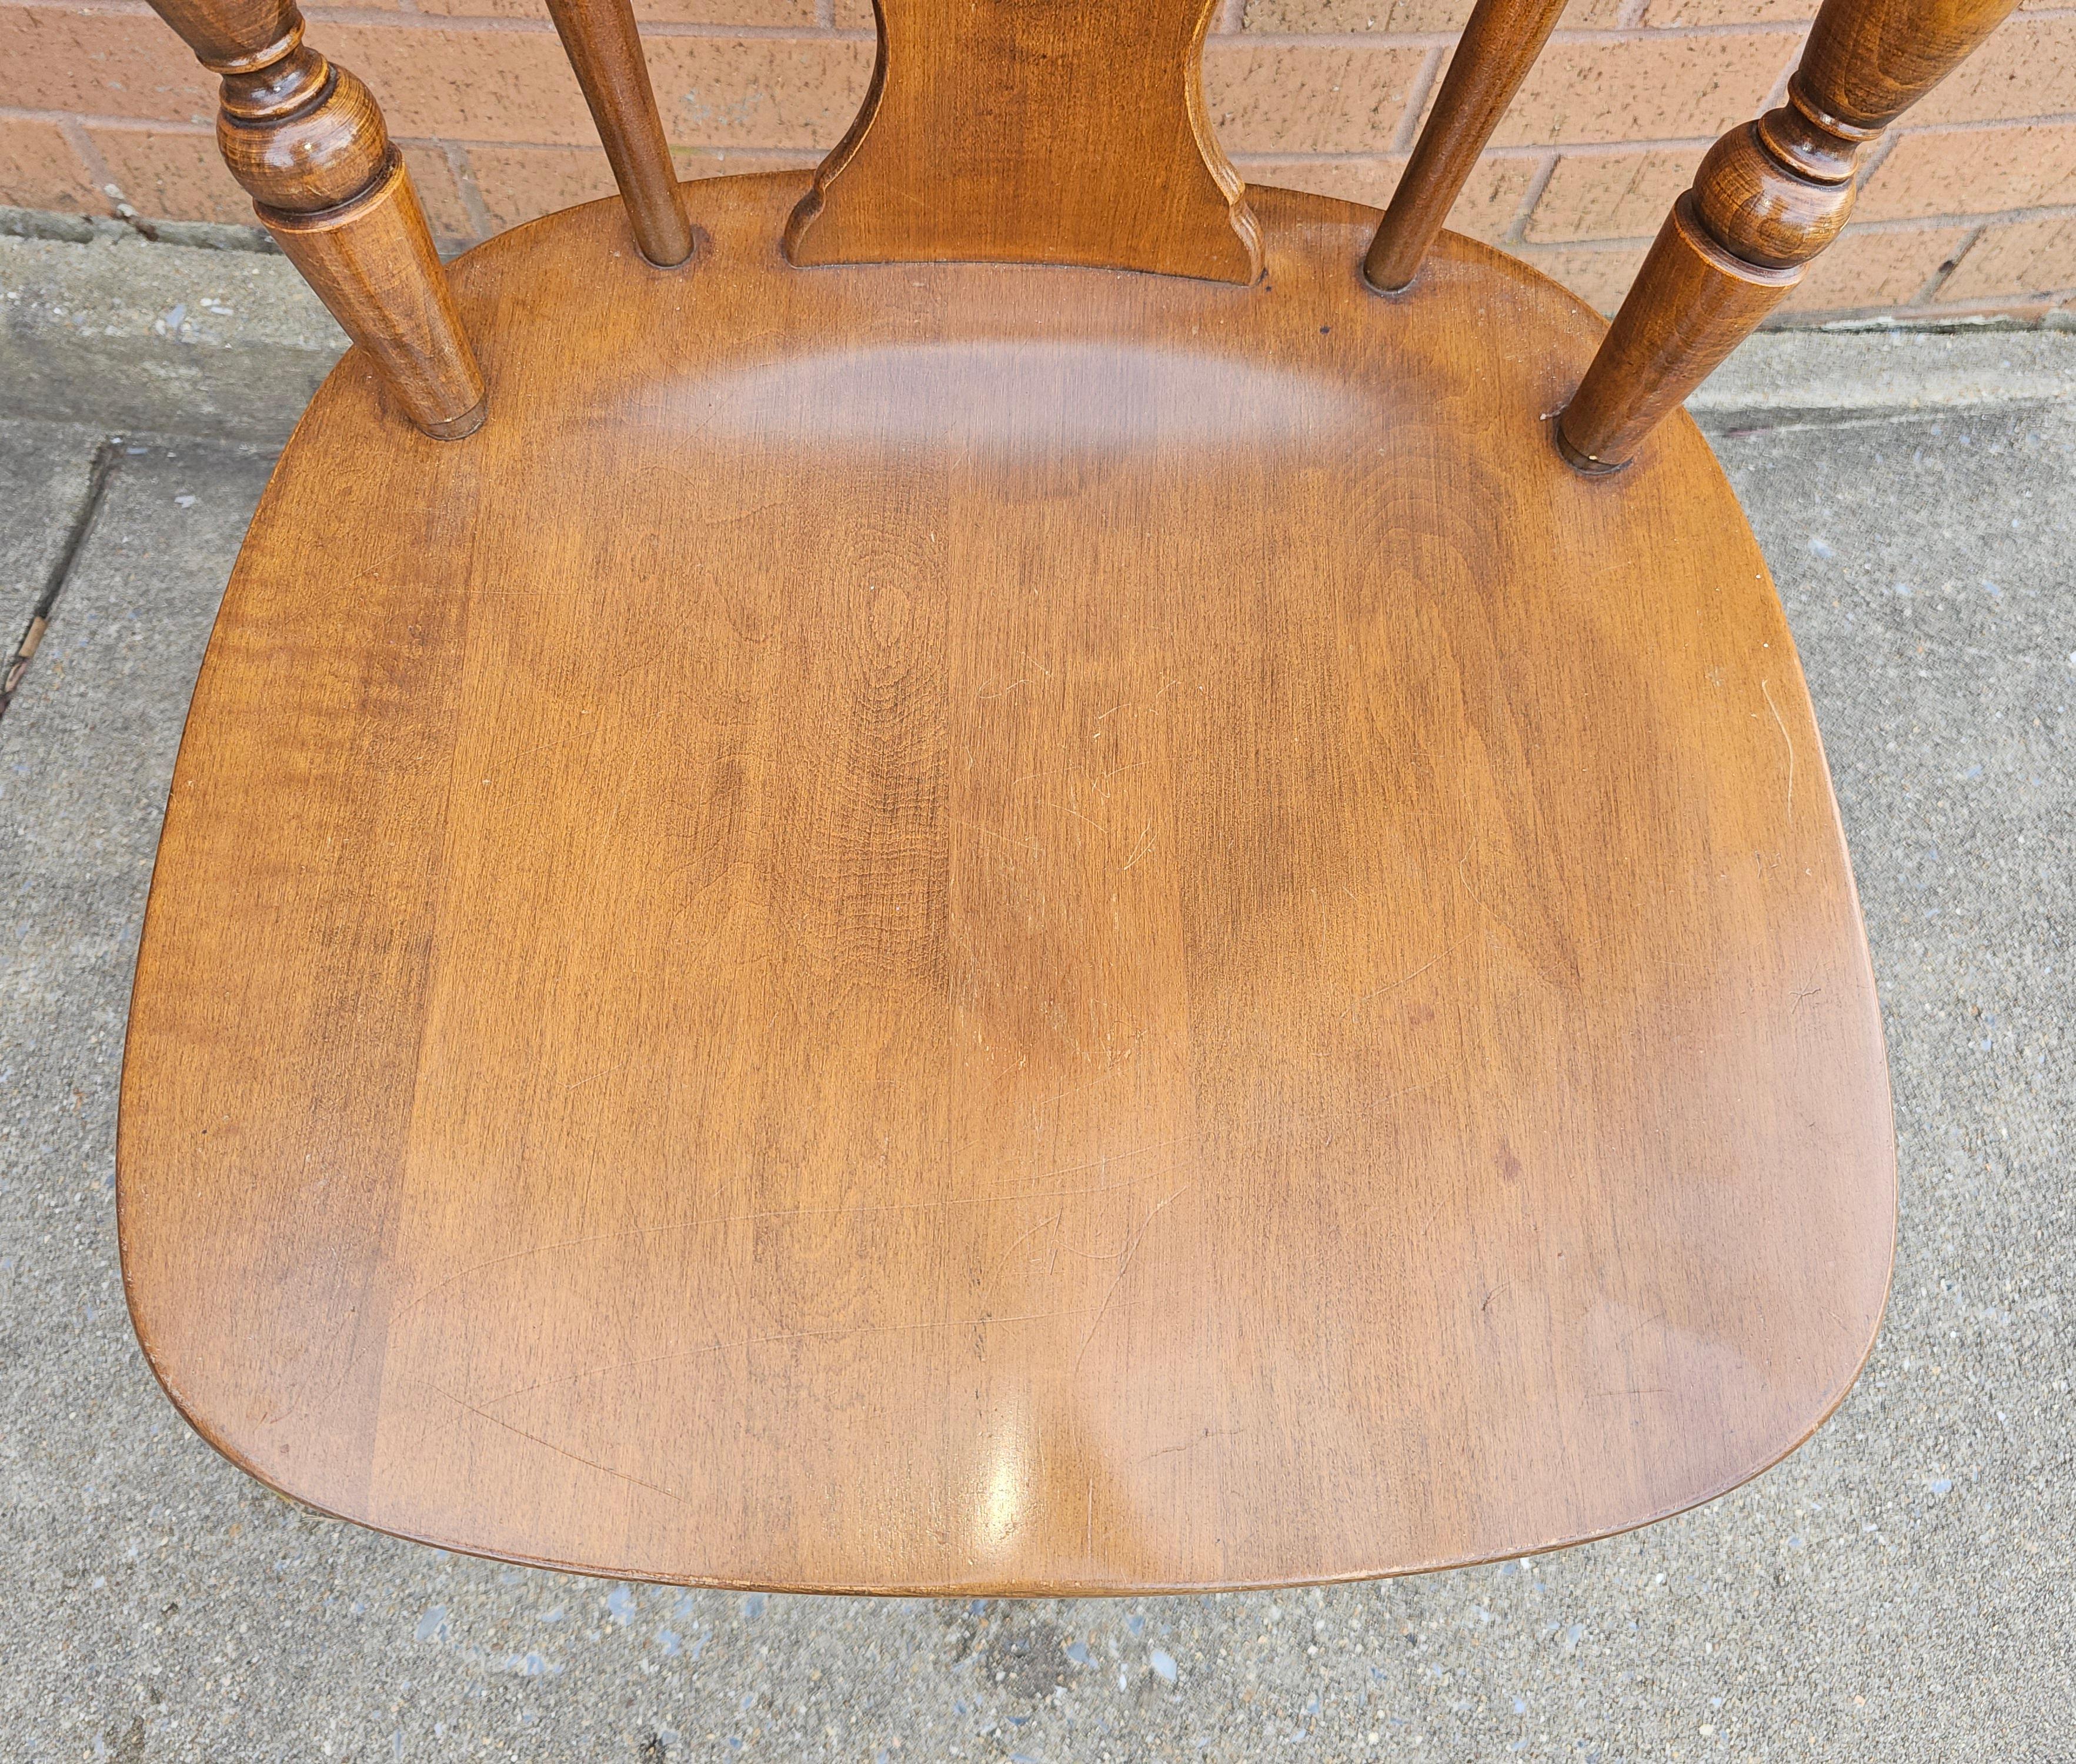 Stained Set 4 Heywood Wakefield Hard Rock Maple Cinnamon Colonial Style Splat Back Chair For Sale